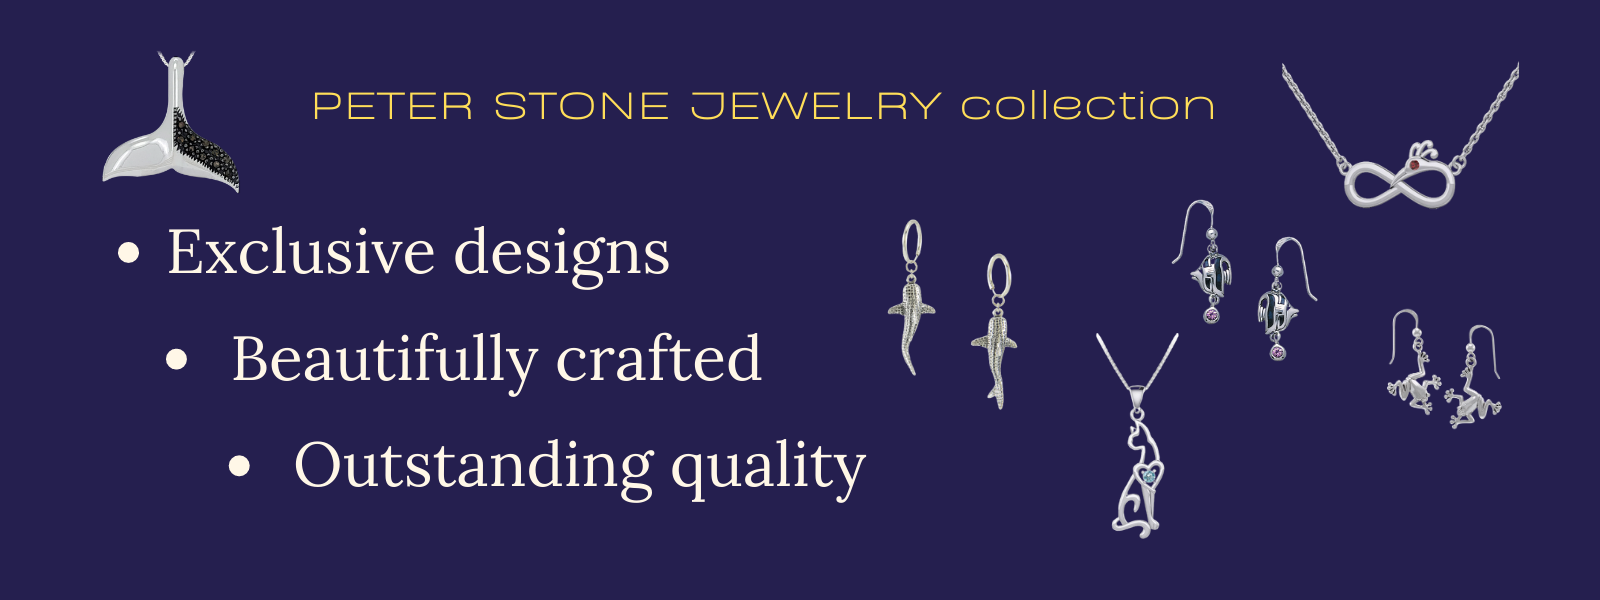 Peter Stone Jewelry Collection